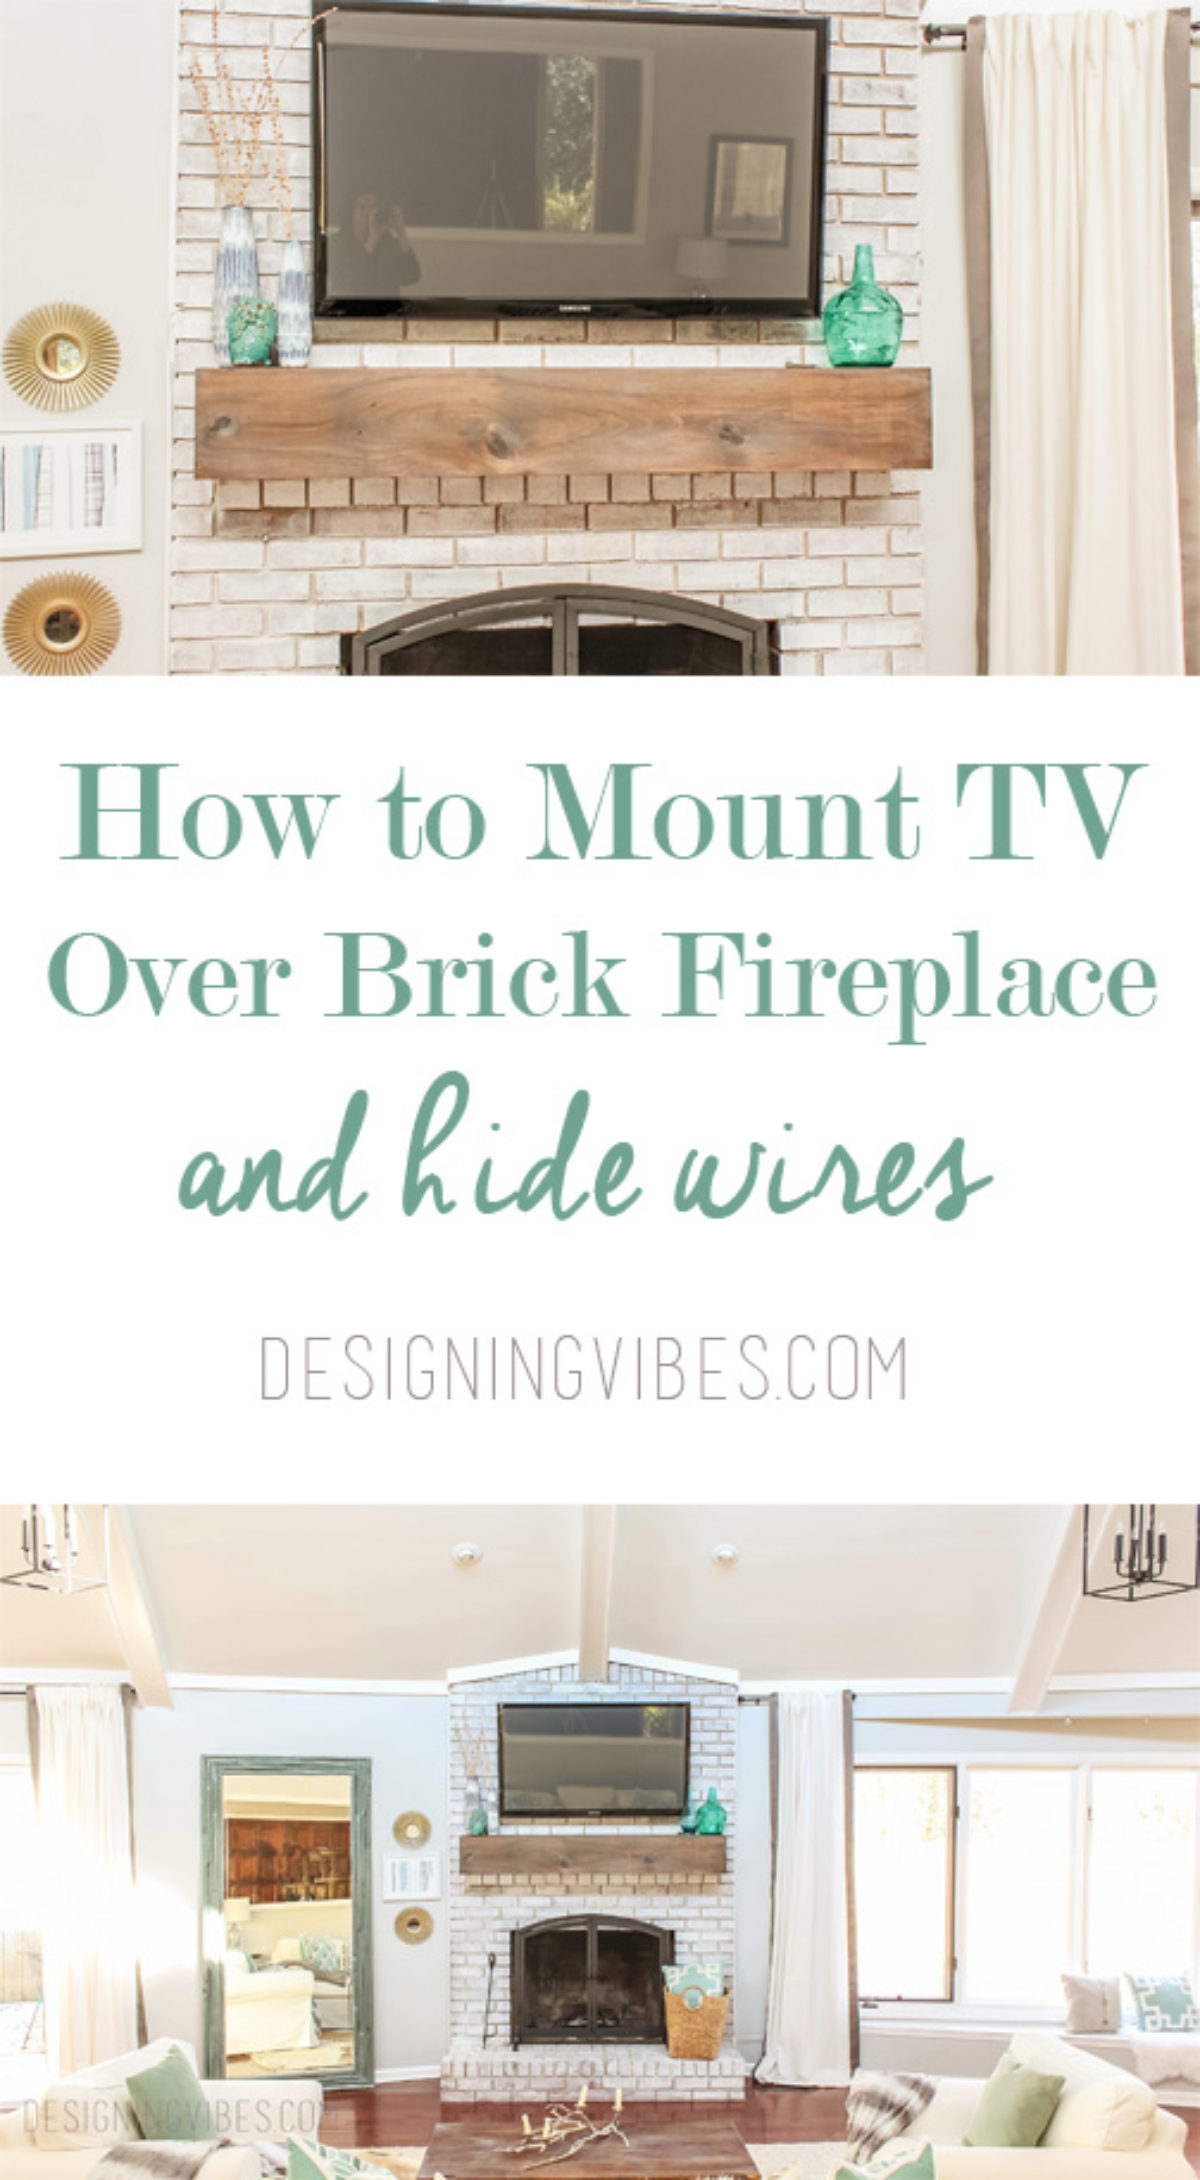 Mount A Tv Over Brick Fireplace, How To Hang Tv Above Fireplace And Hide Wires